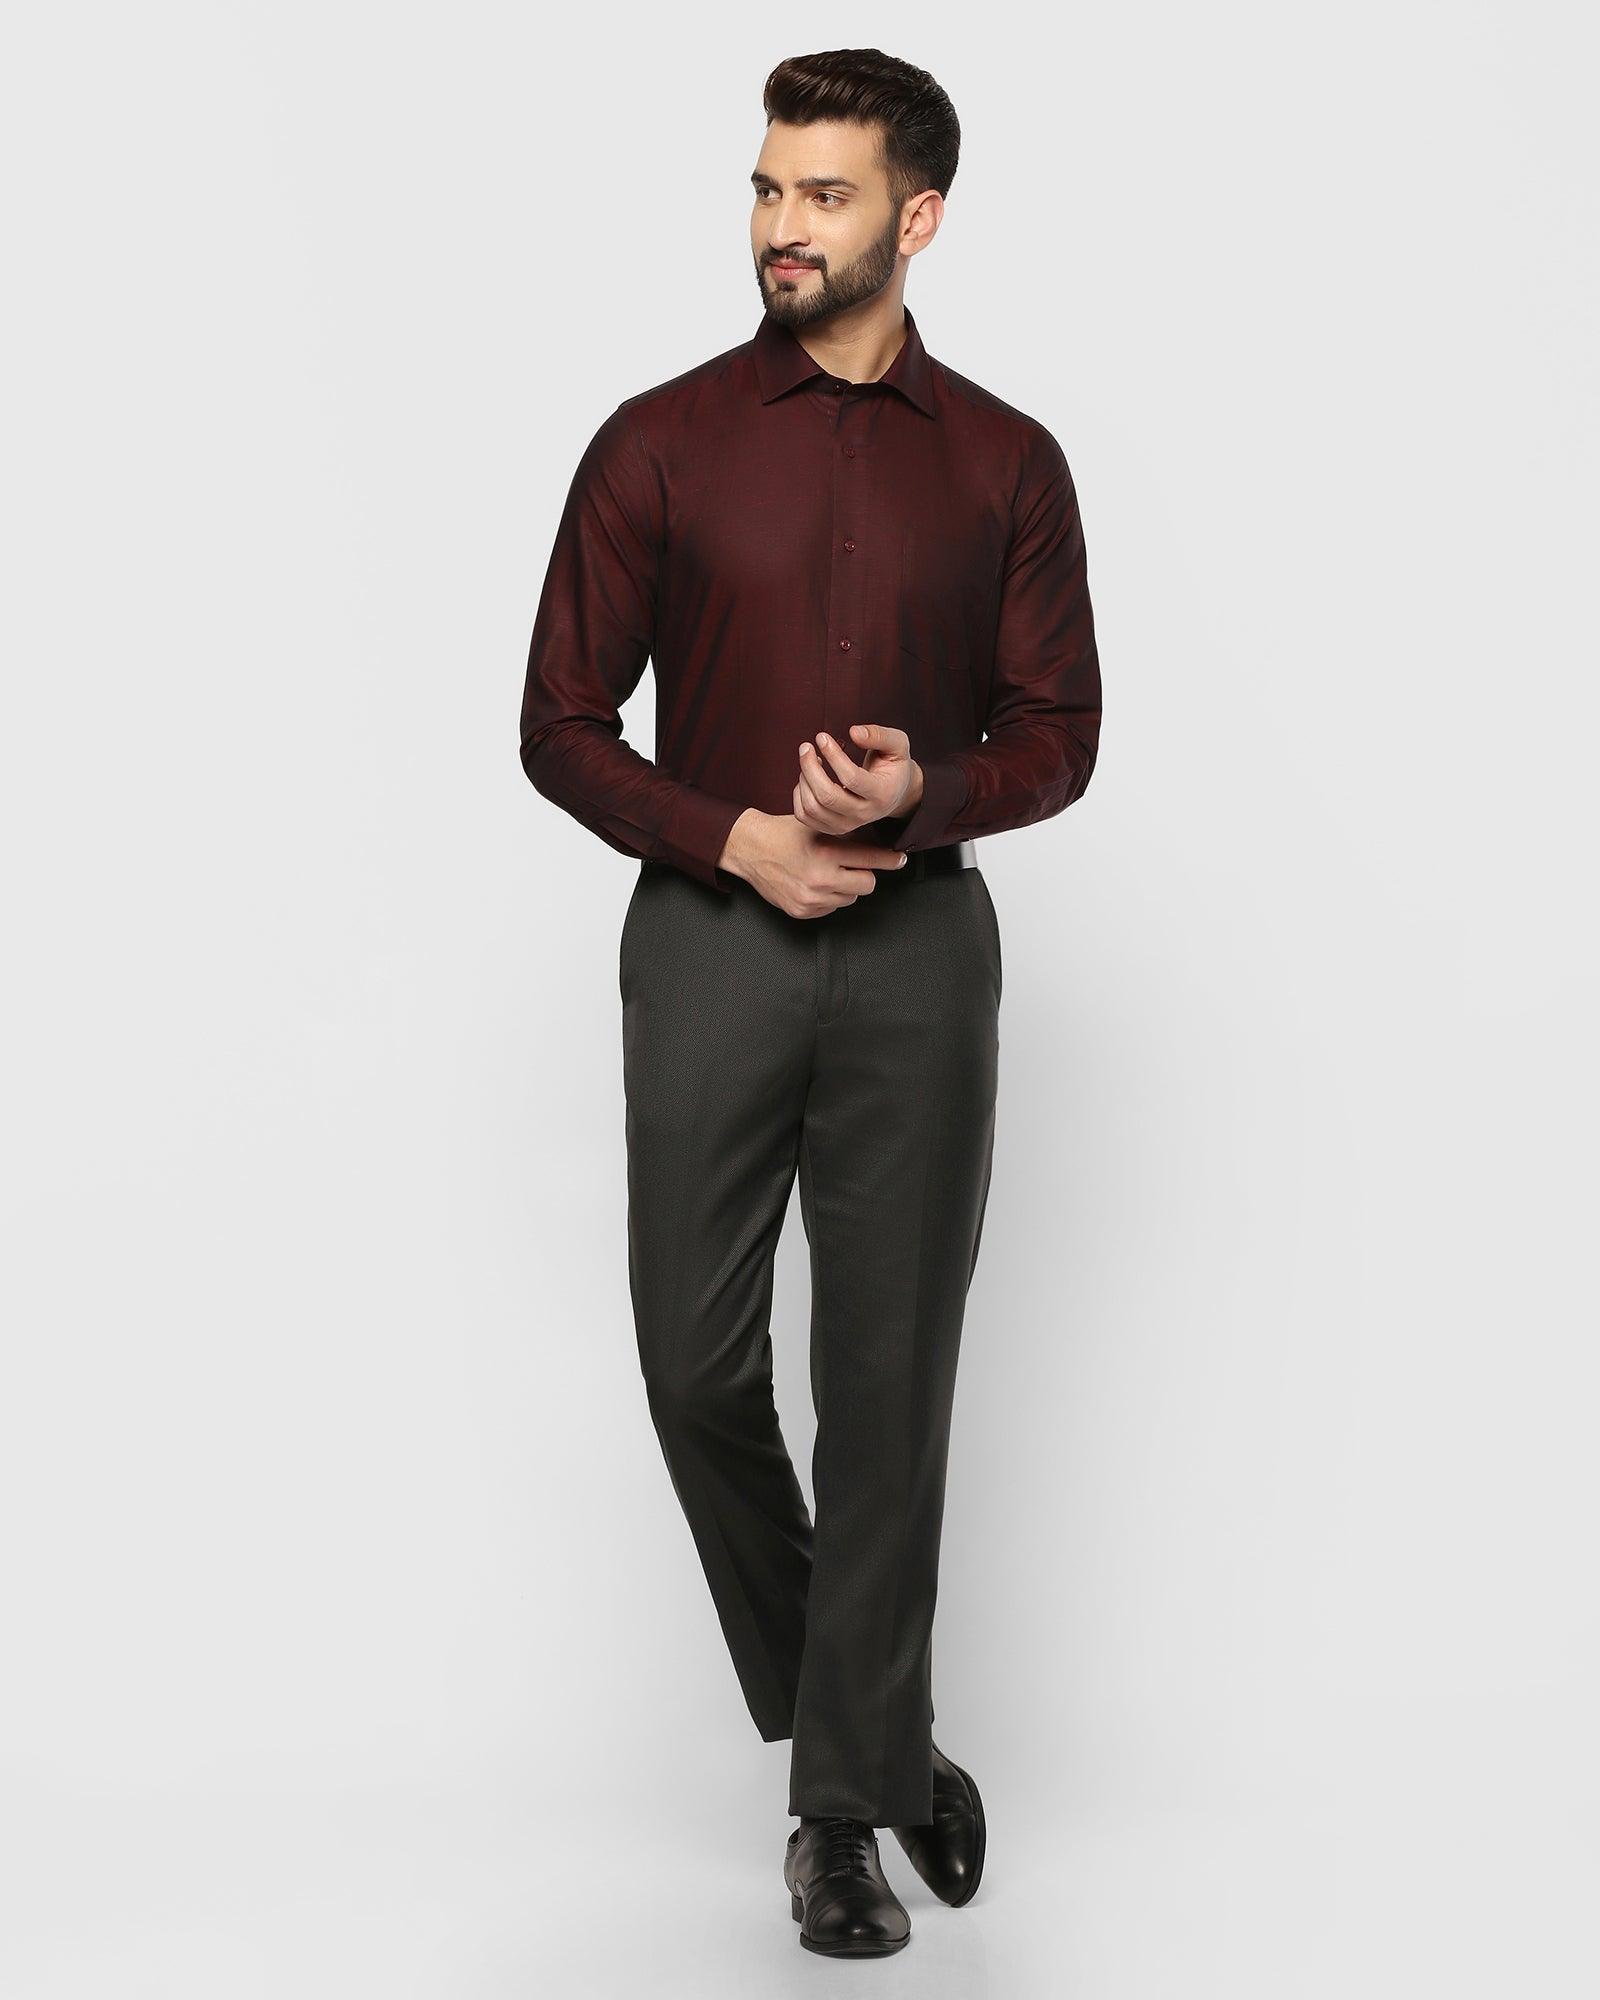 Straight B-90 Formal Charcoal Textured Trouser - Welta